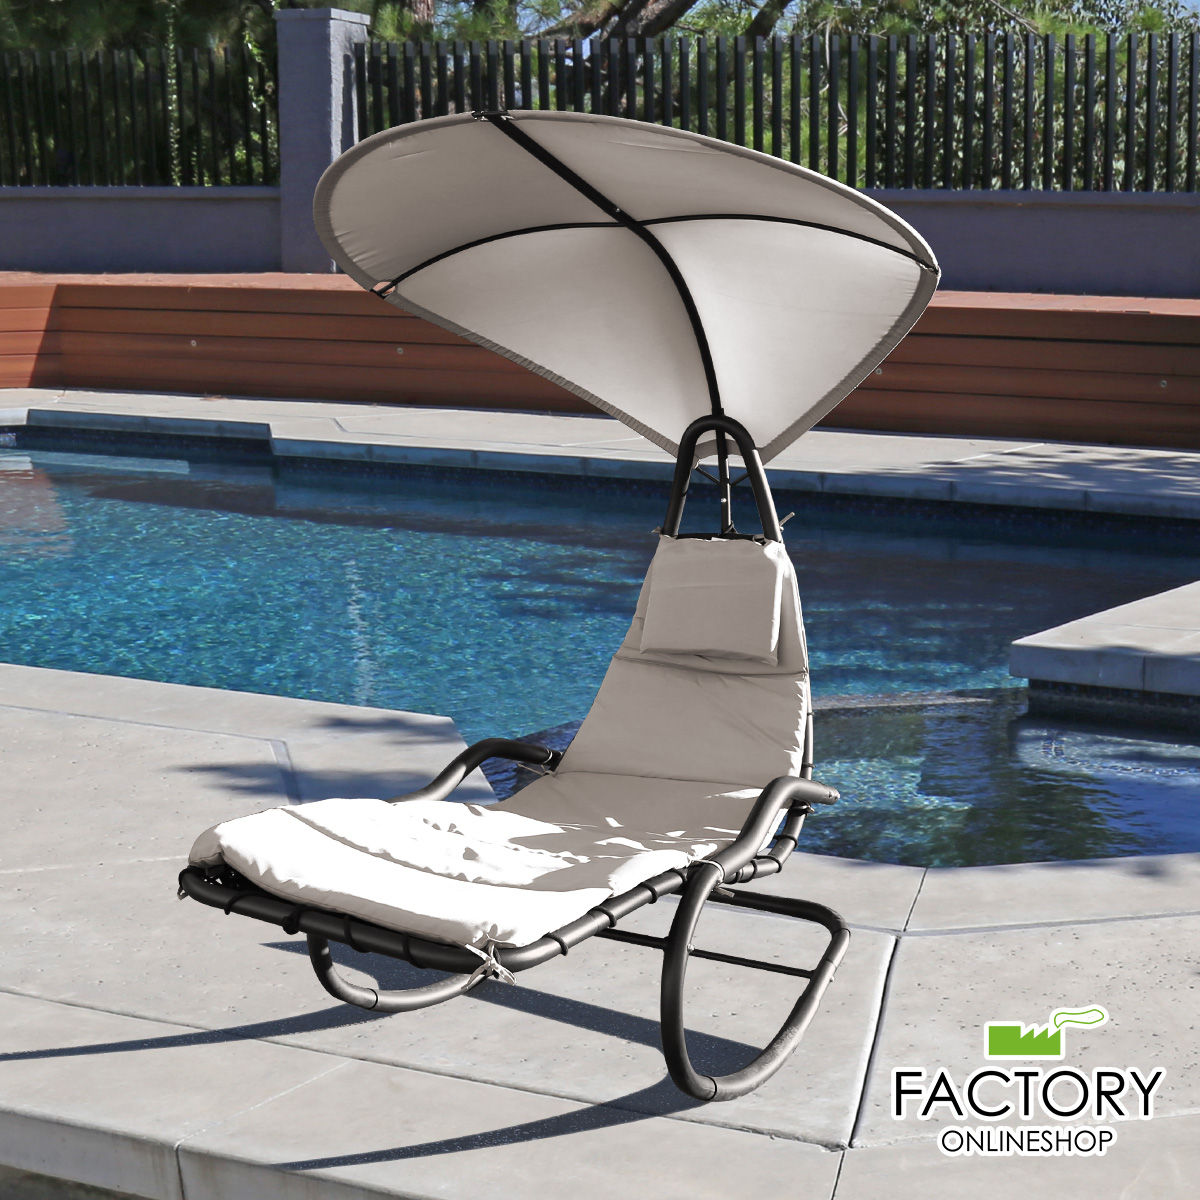 Rocking Hanging Lounge Chair - Curved Chaise Rocking Lounge Chair Swing For Backyard Patio w/ Built-in Pillow Removable Canopy with stand {Beige} - image 1 of 8